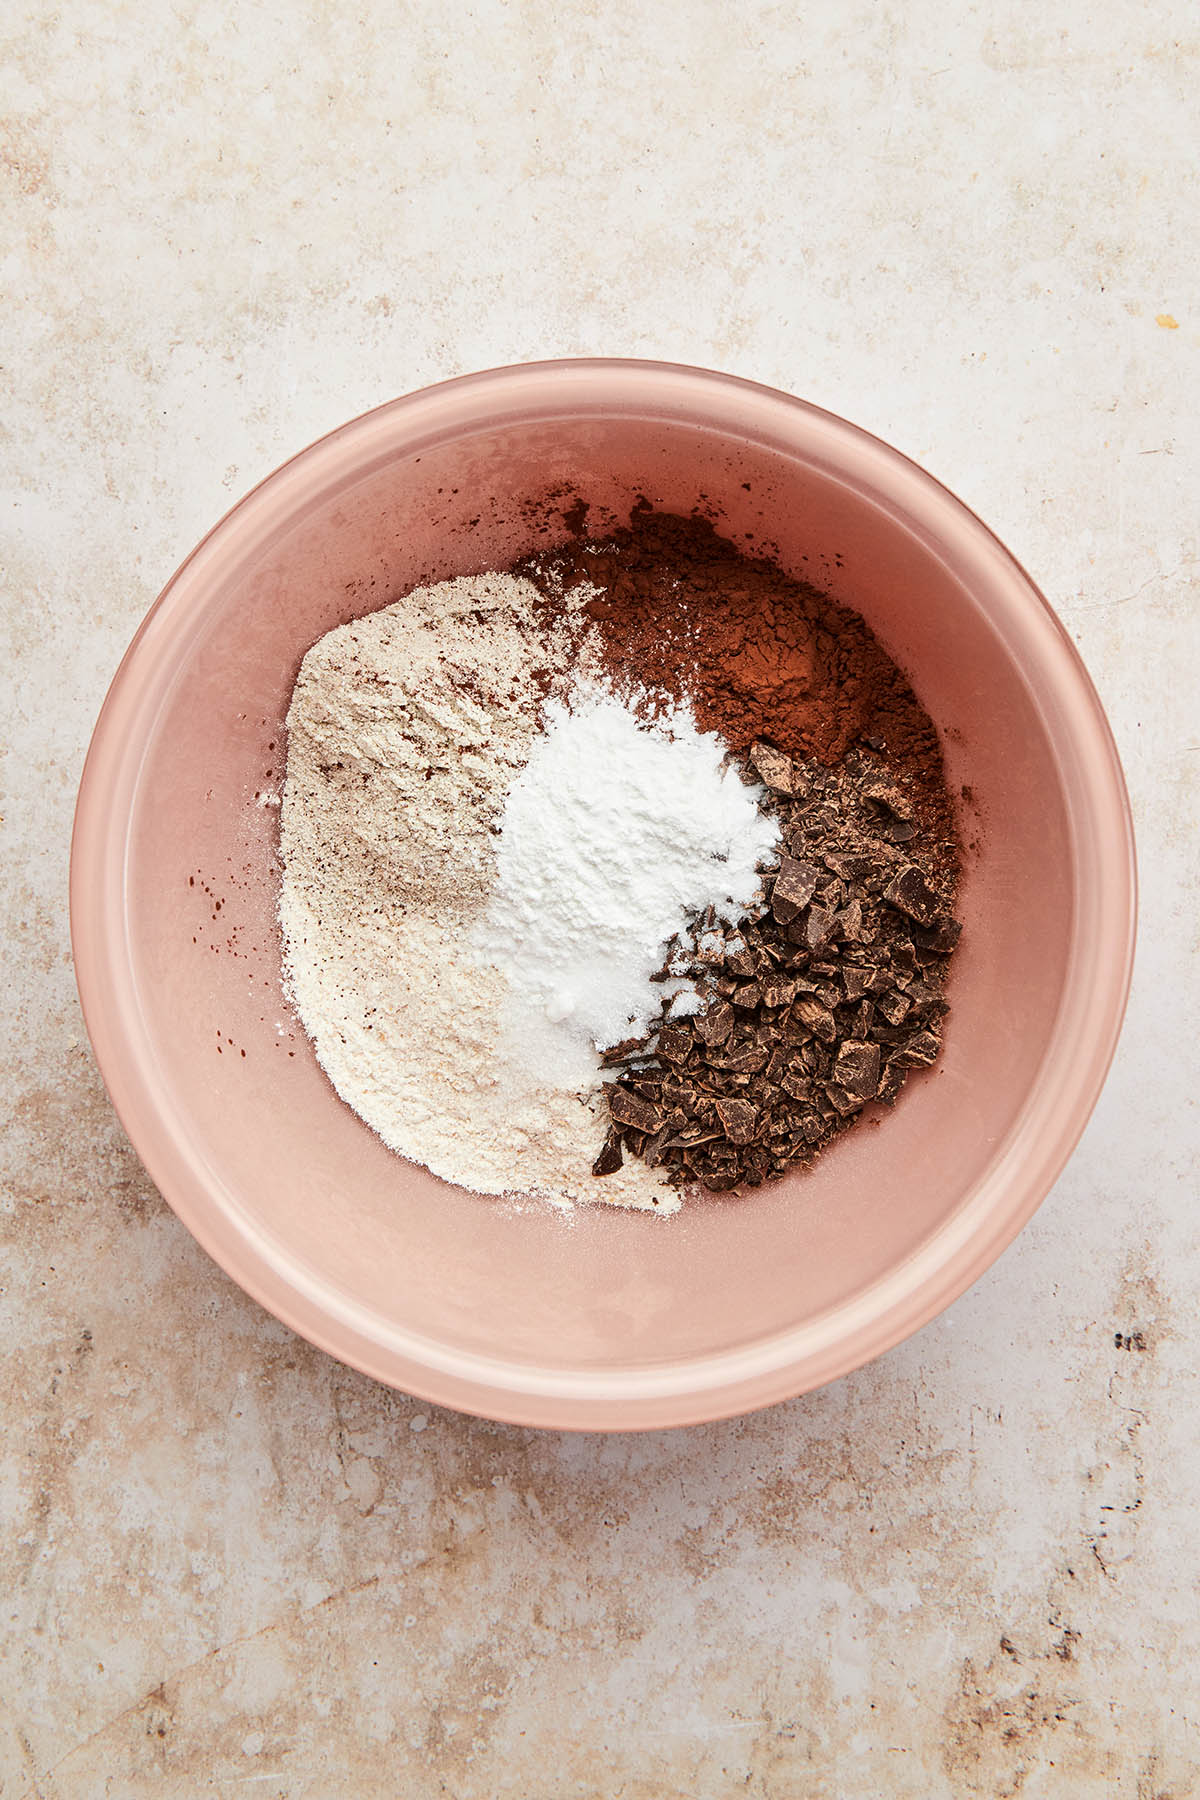 Unmixed dry cake ingredients in a bowl.